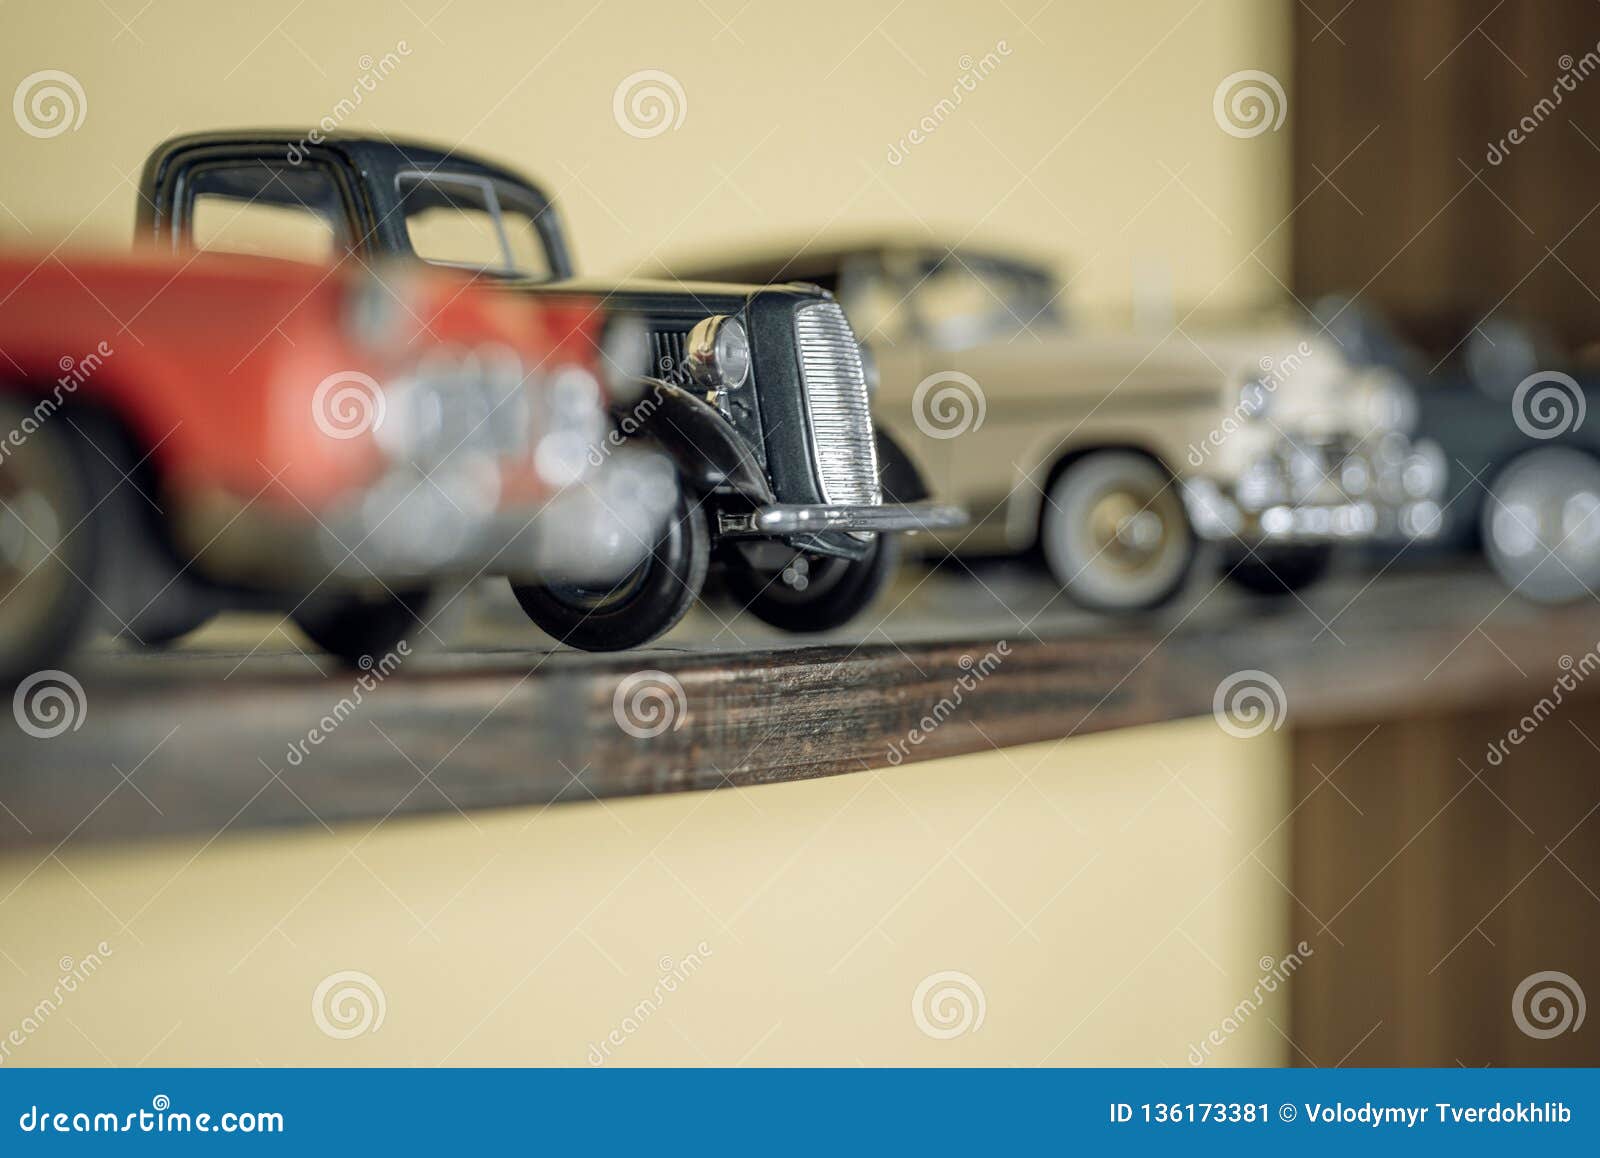 Vintage Tin Classic Car Model Handcraft Car Toy Home Office Room Decor 